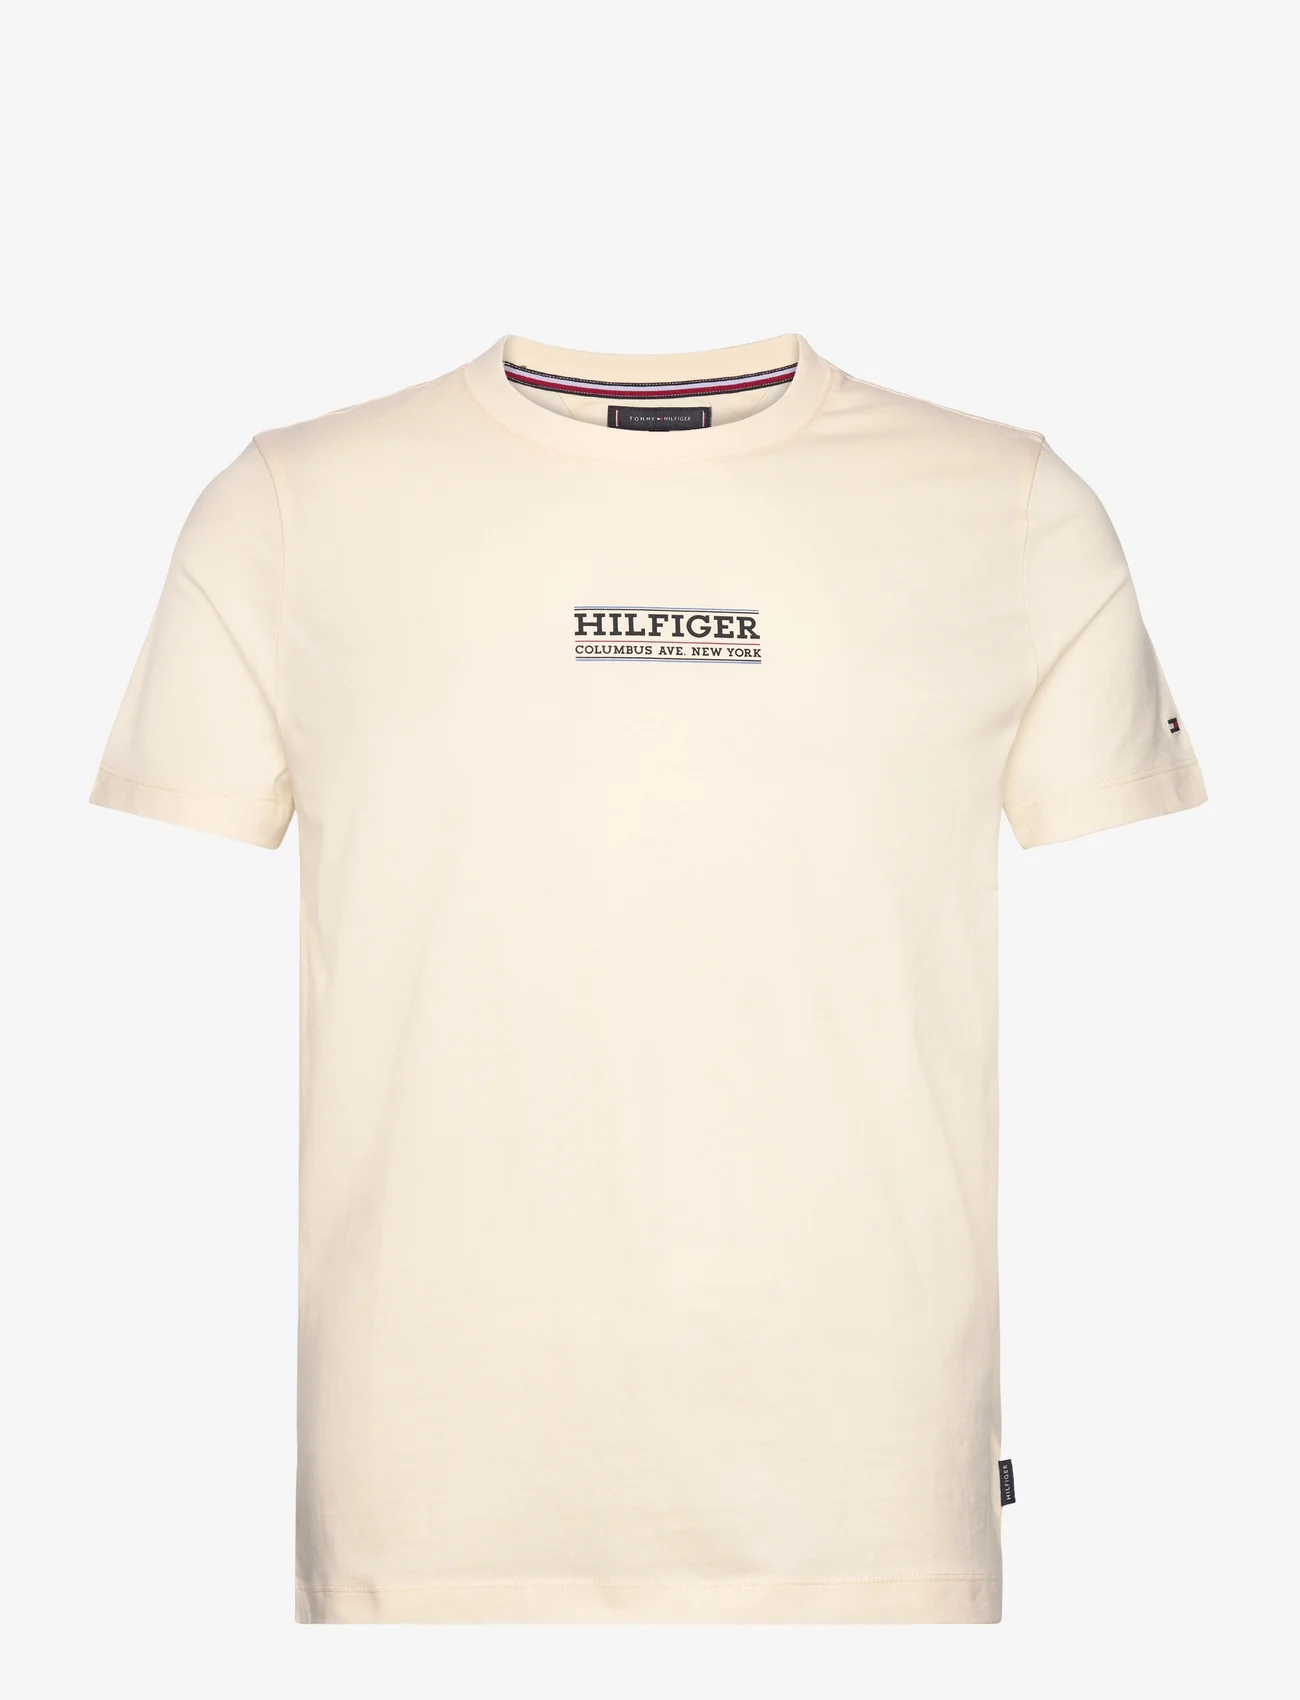 Tommy Hilfiger - SMALL HILFIGER TEE - lowest prices - calico - 0